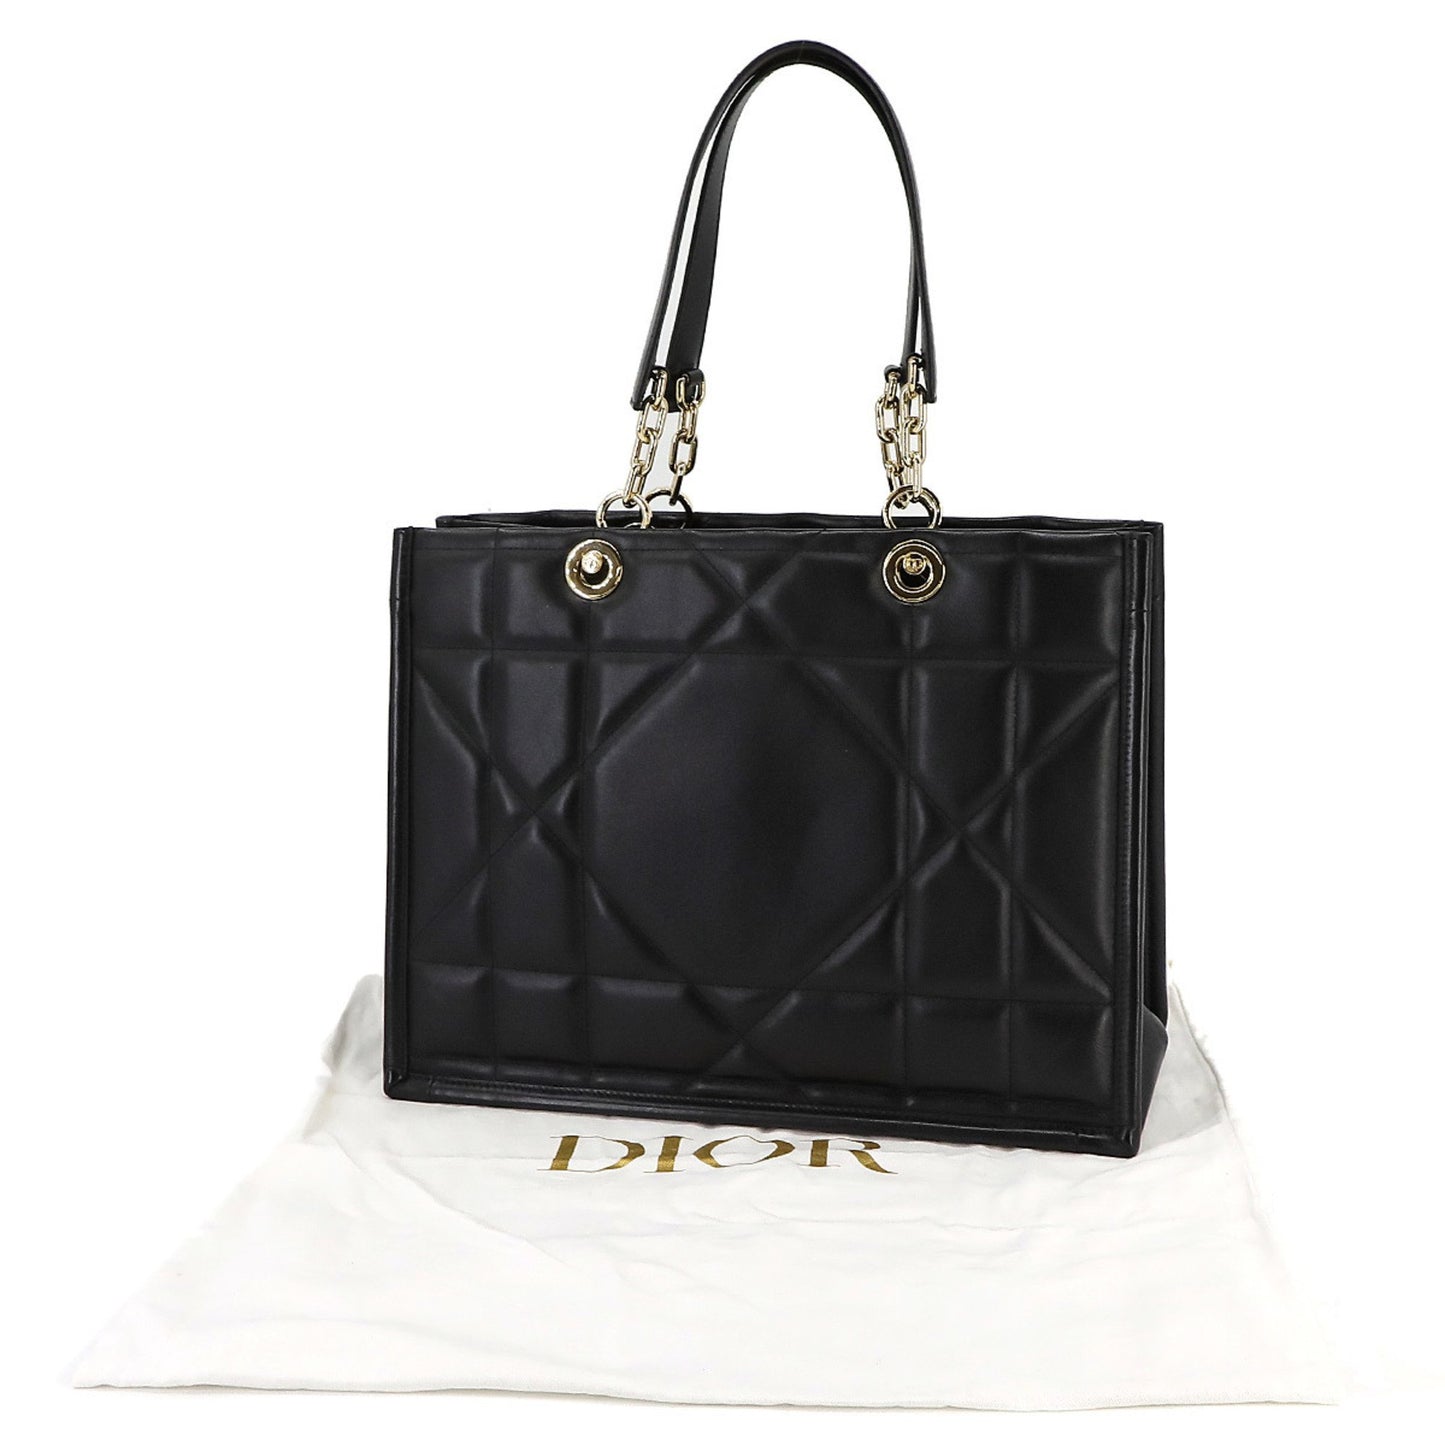 Dior Women's Luxurious Black Leather Tote Bag in Black